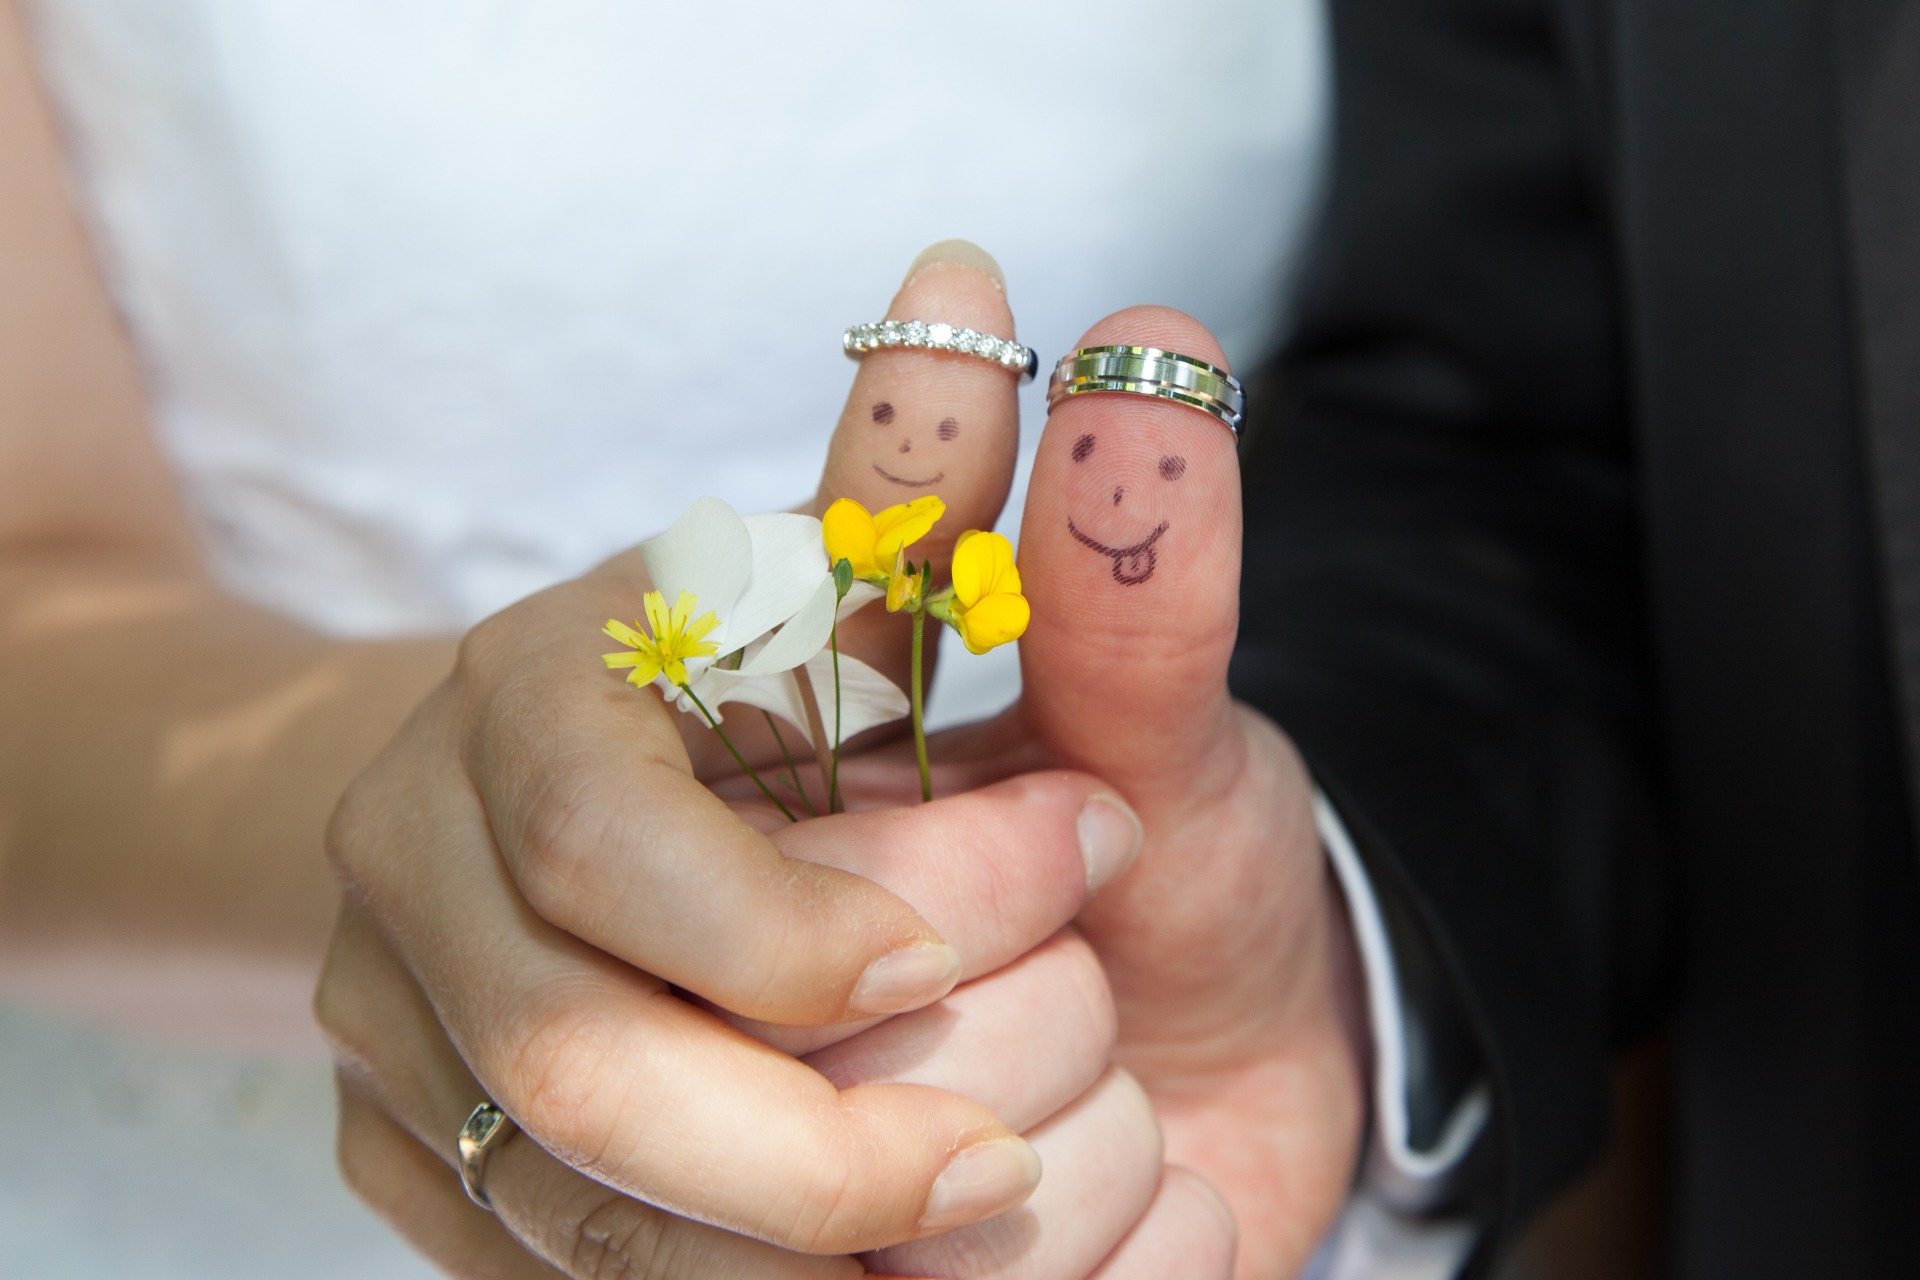 A couple wearing wedding outfits with faces drawn on either of their thumbs.